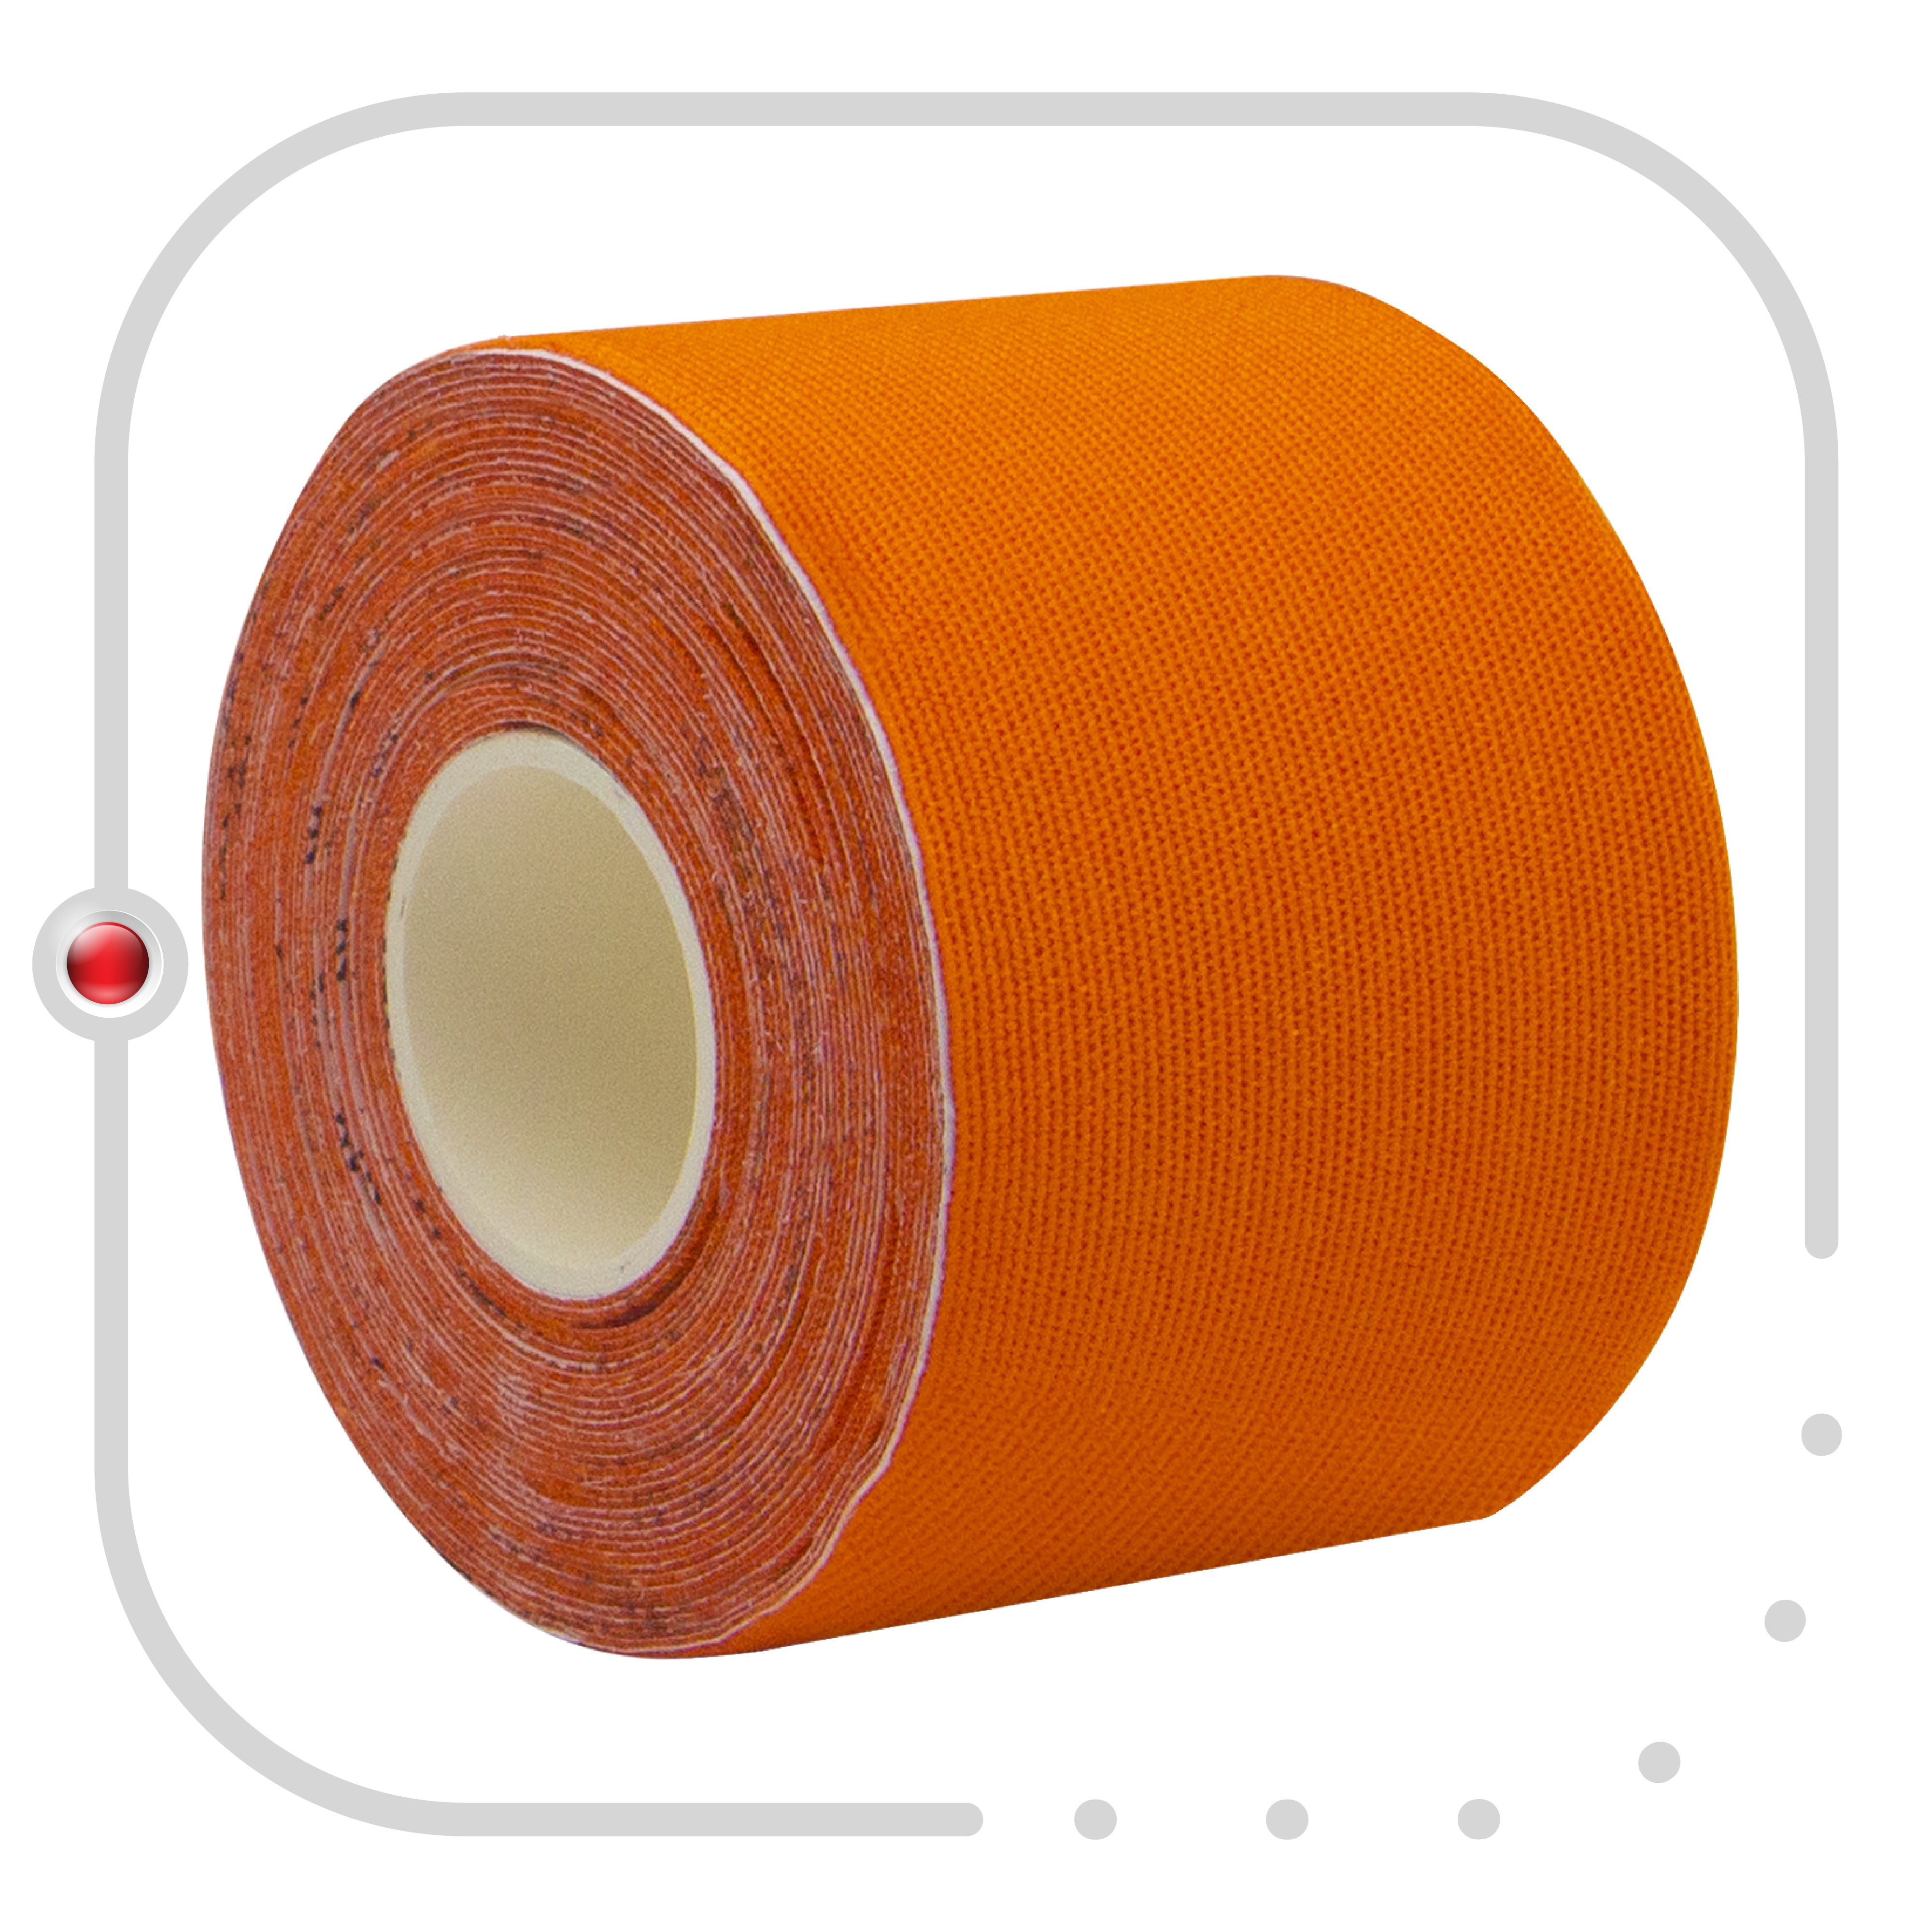 Orange Kinesiology Tape Pre Cut with Dispenser - Athletic Sports Tape - For Healing and Recovery